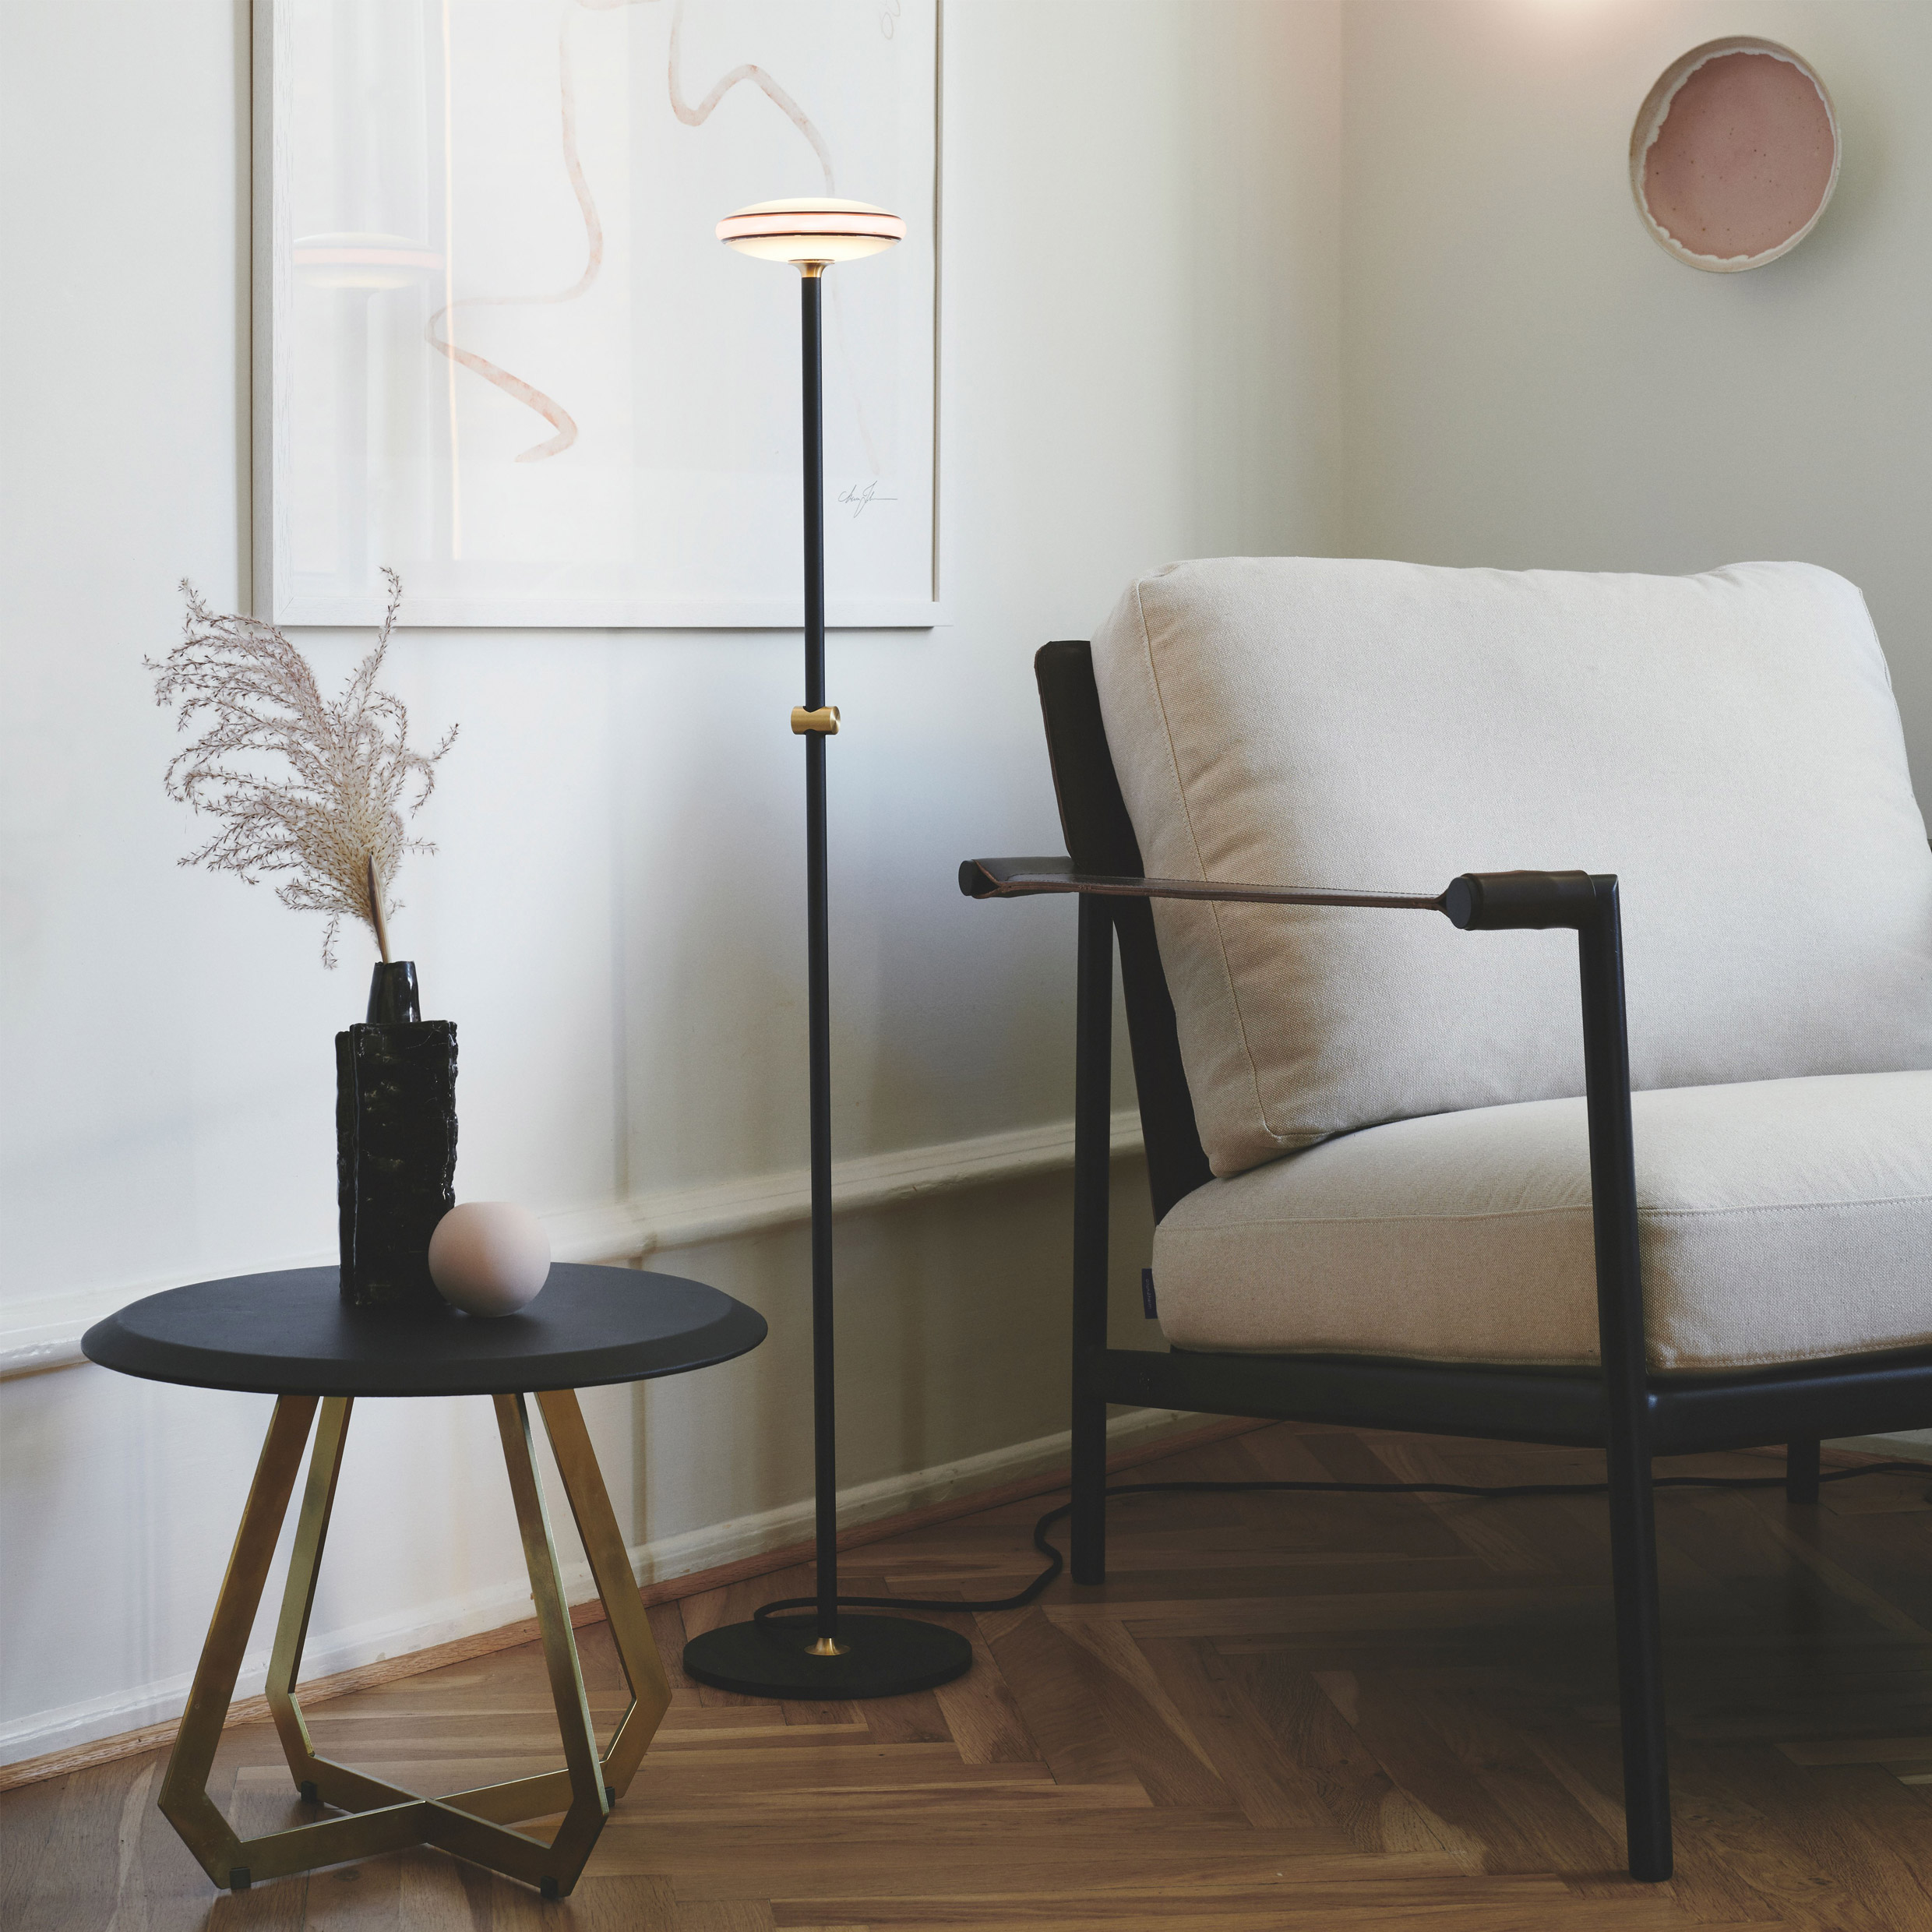 SHADE // ØS1 - FLOOR LAMP | SMART LED LIGHT - WHITE - WITH REMOTE CONTROL